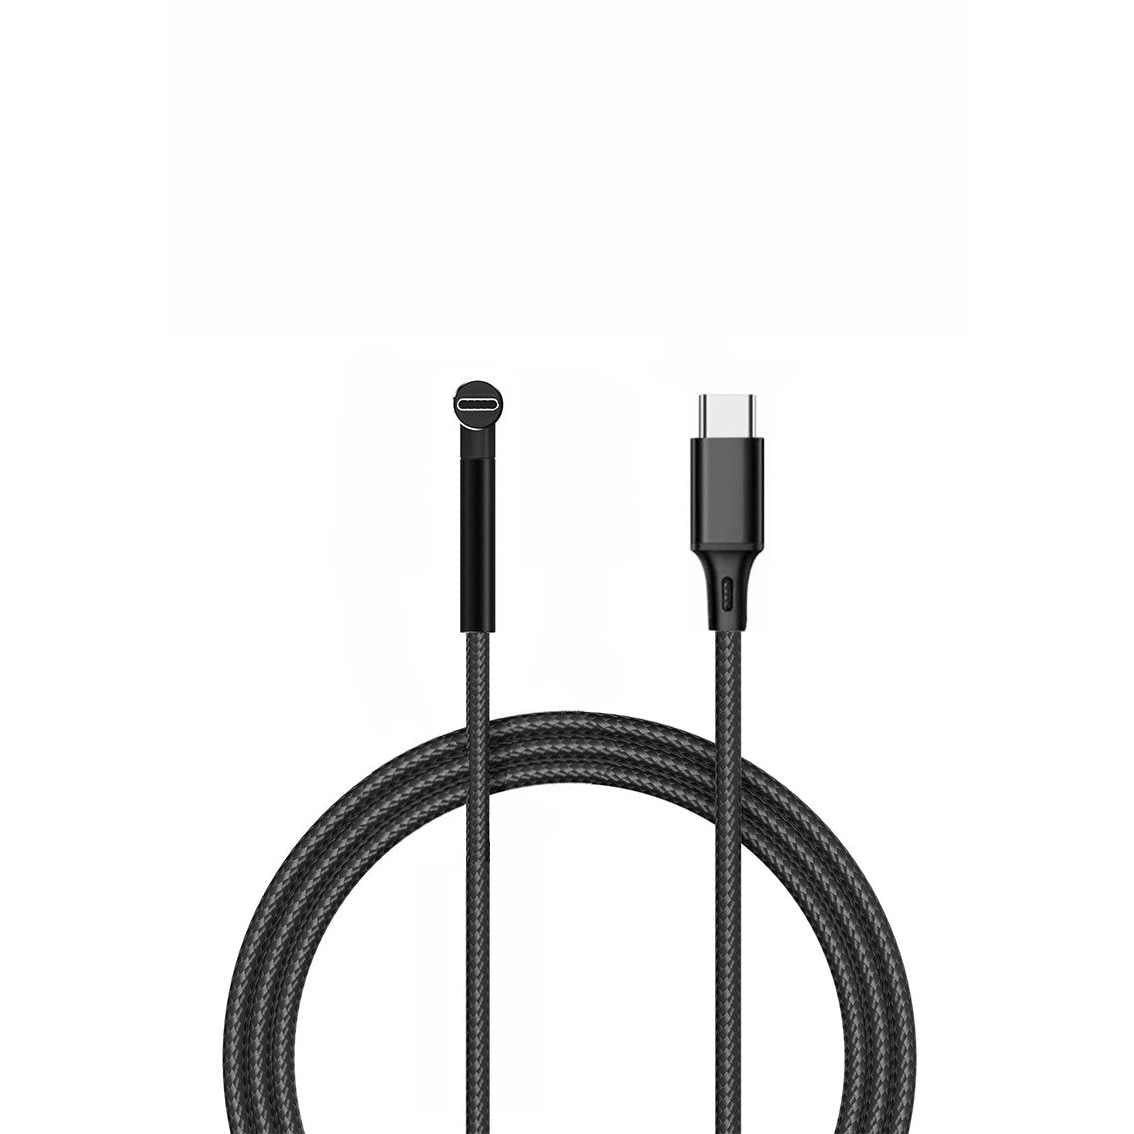 USB-C Charging Cable with a Stand